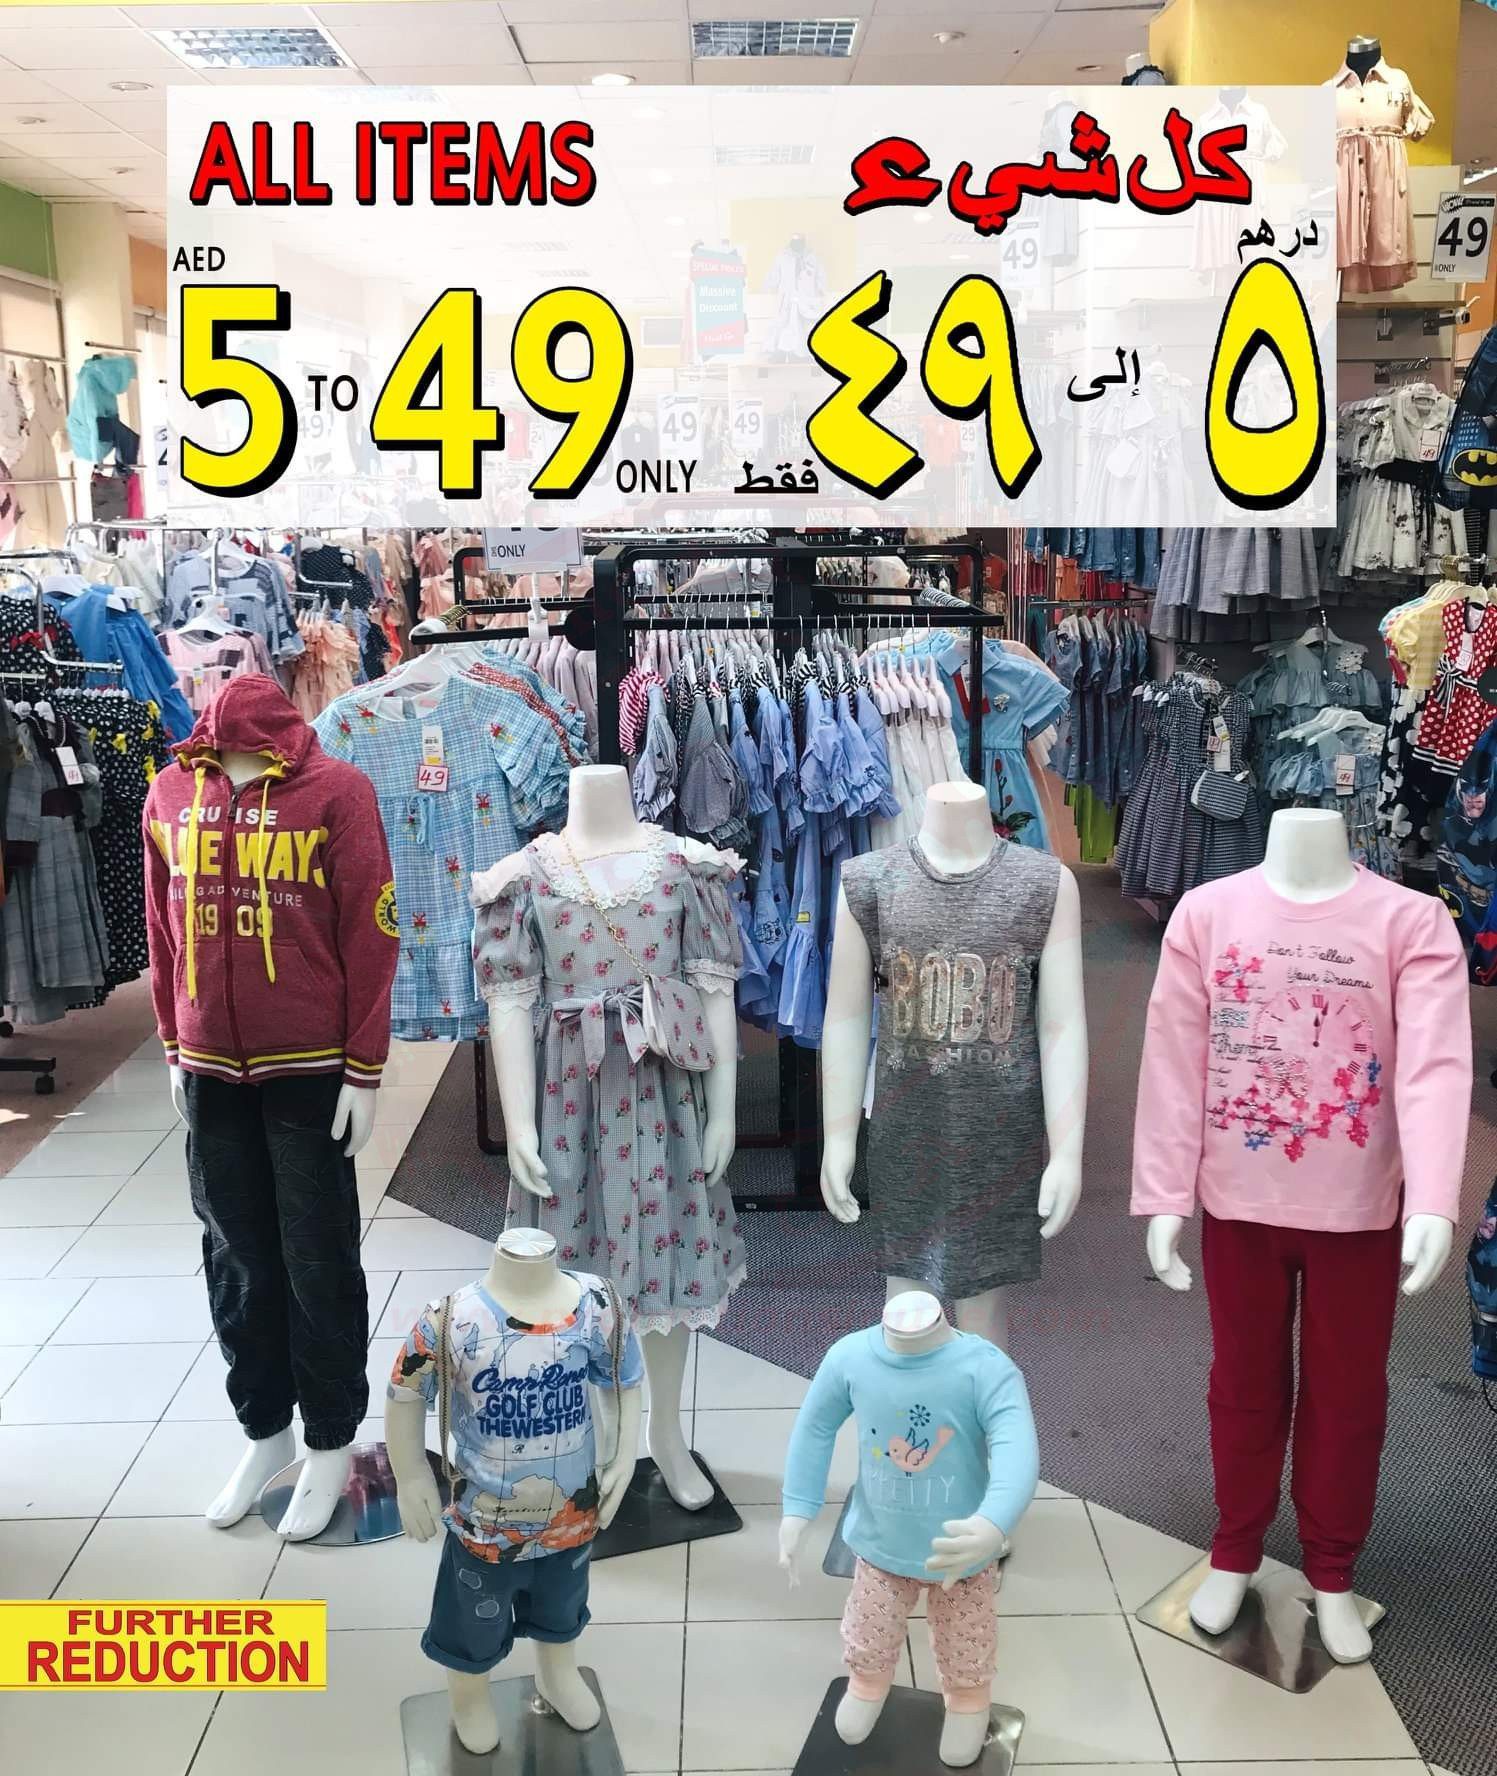 Stock Clearance – Everything Aed 5 to 49 Only